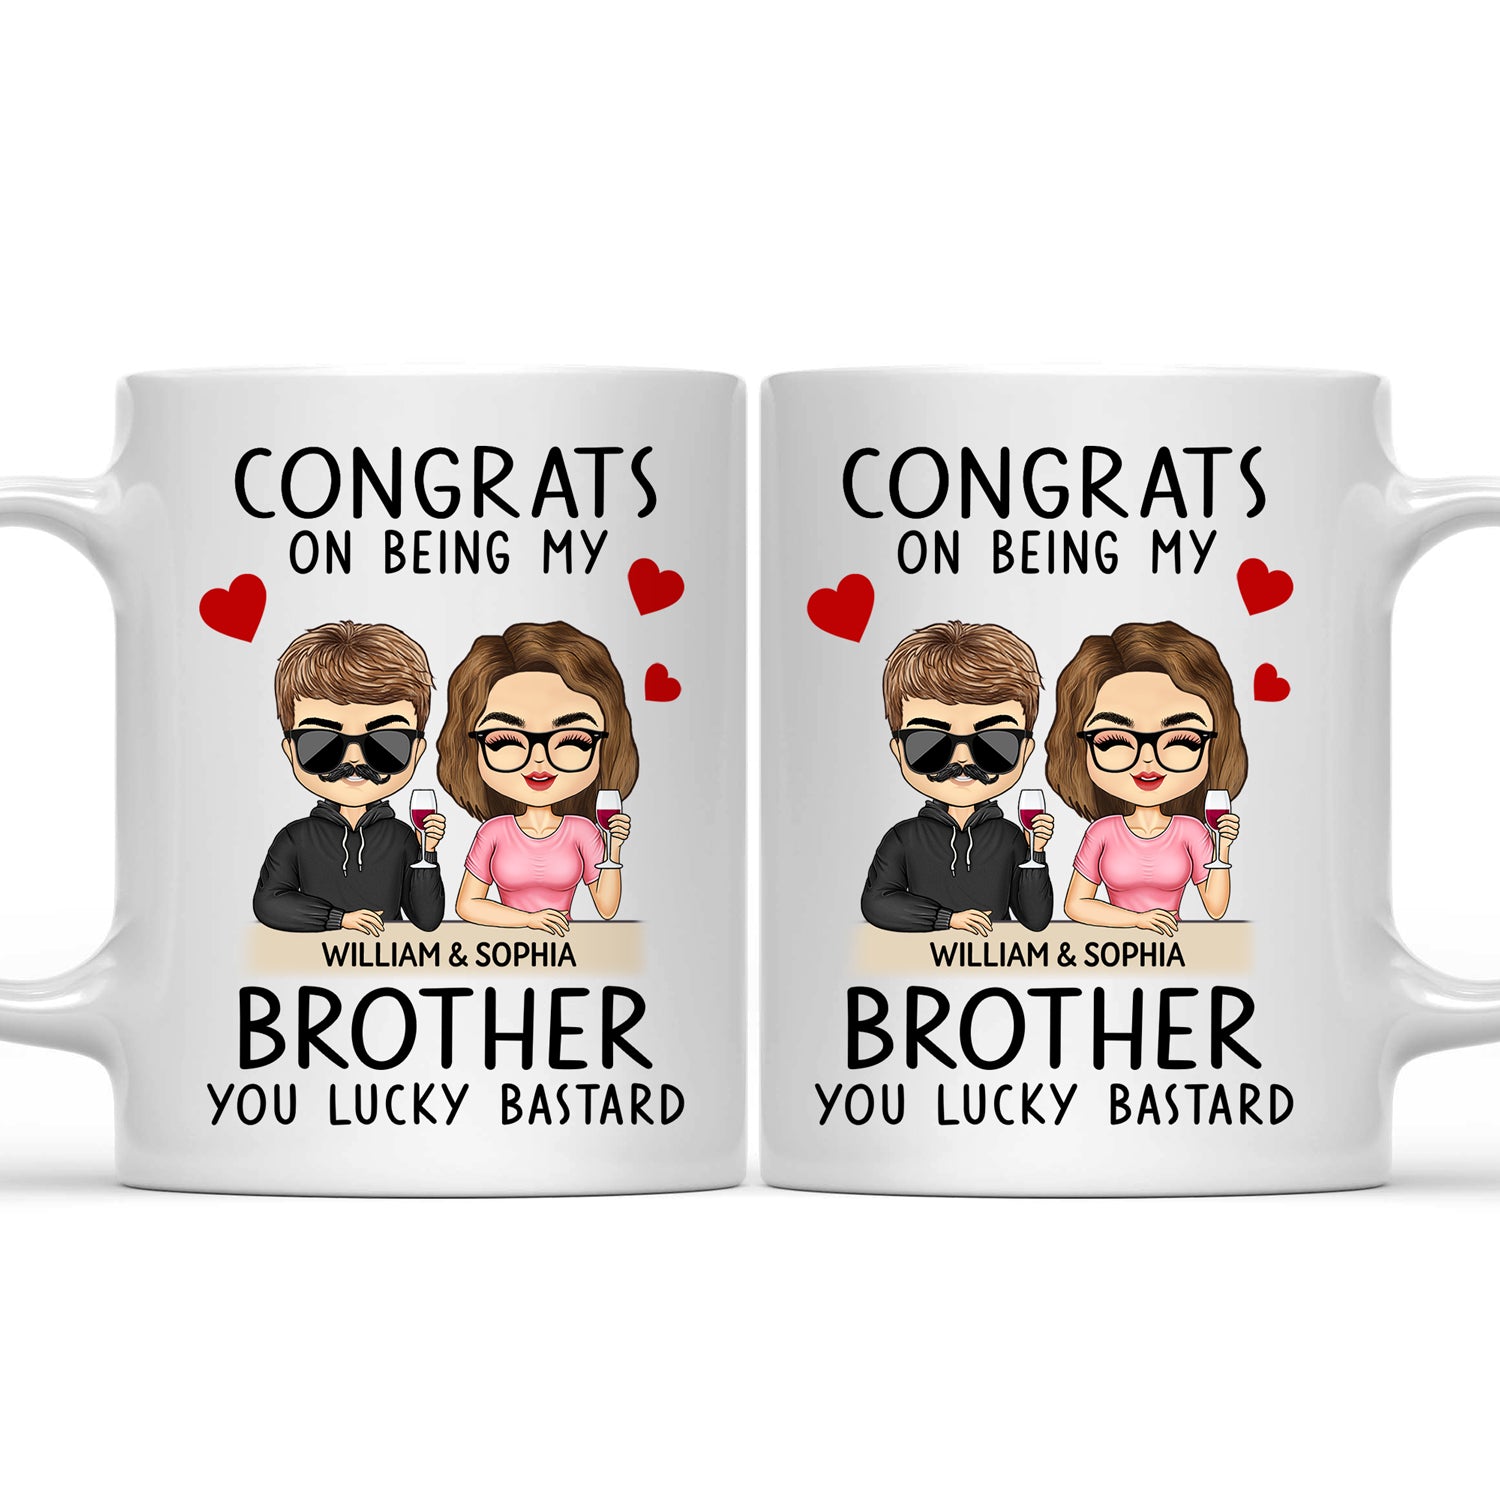 Congrats On Being My Brother Chibi - Birthday, Funny Gift For Brothers, Sisters, Sibling, Family - Personalized Mug